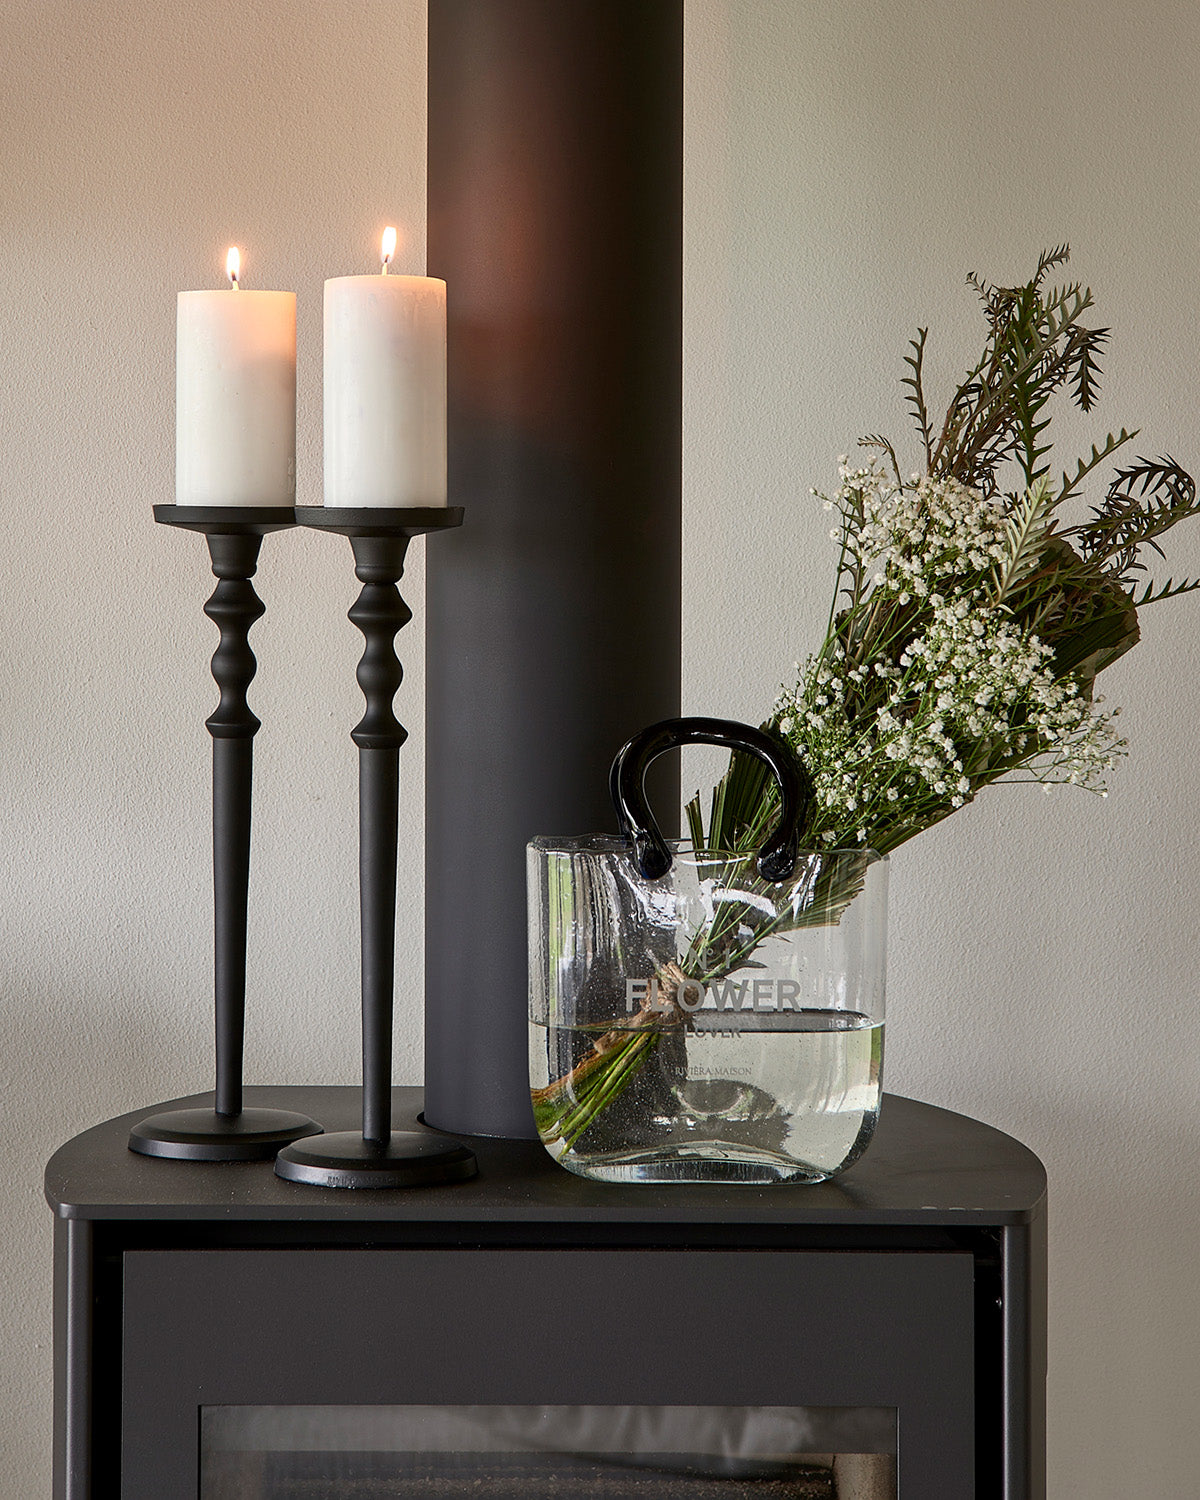 Candle Holder with off white block candles by Riviera Maison